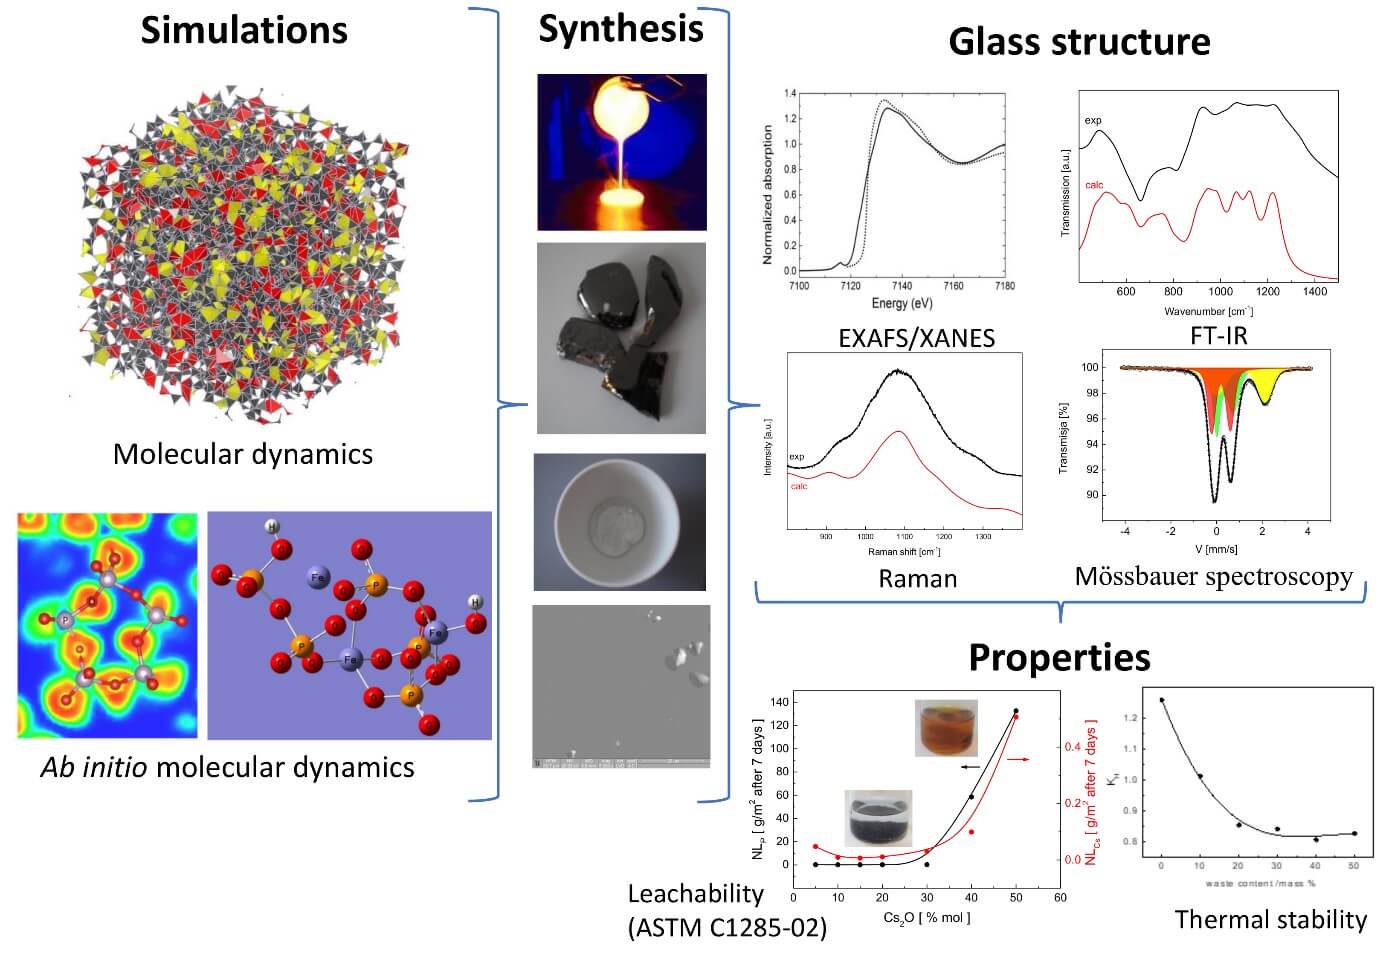 glass structure synthesis and symulations